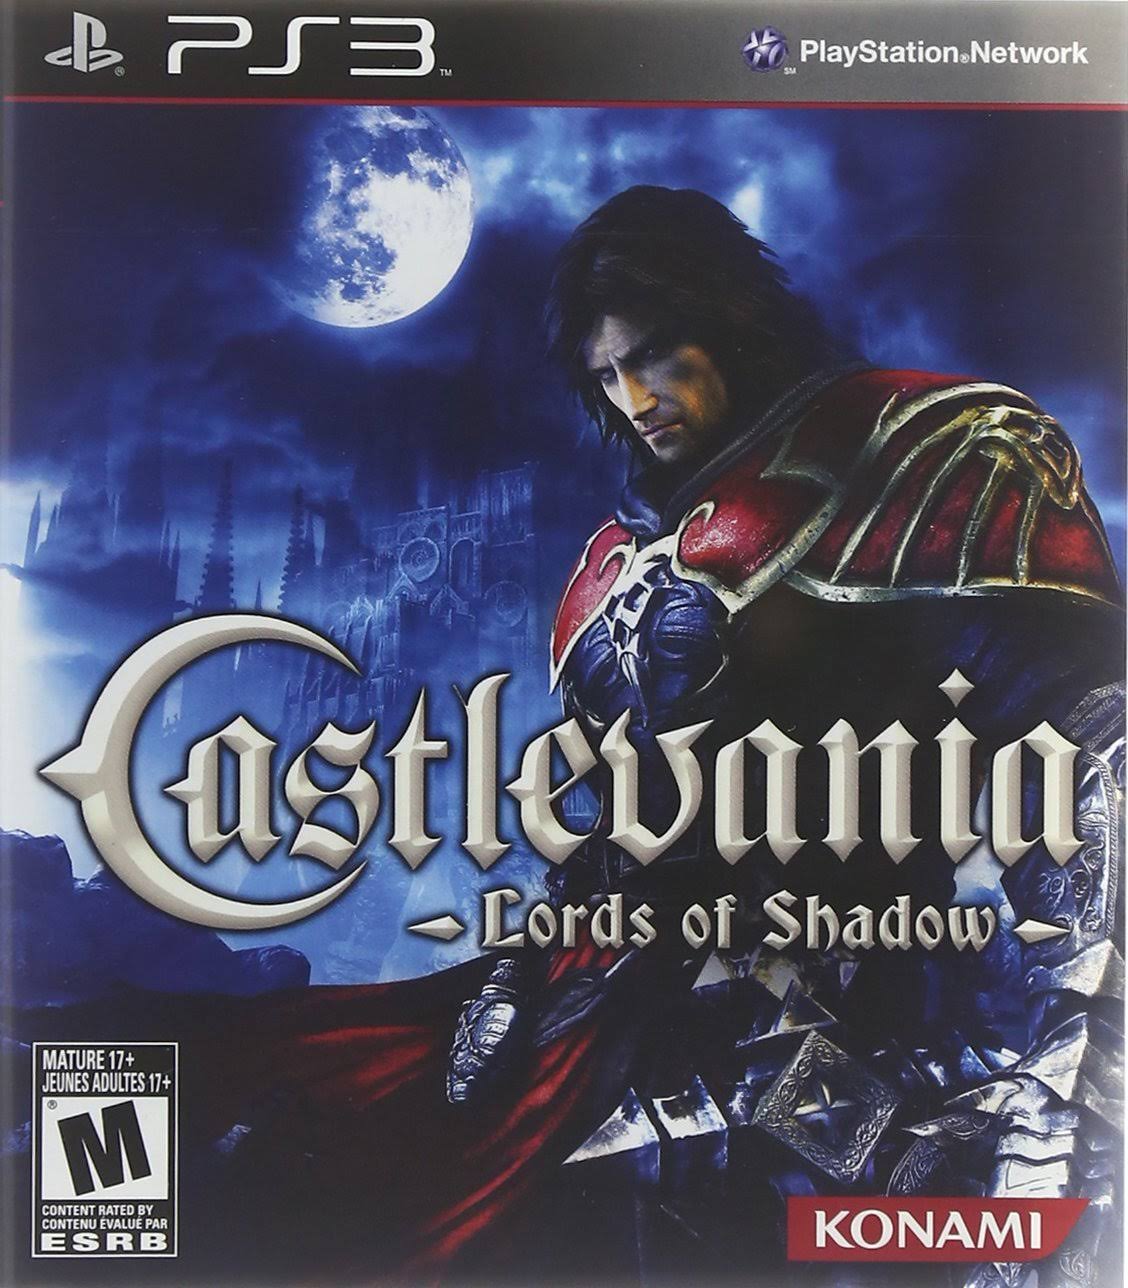 Castlevania: Lords Of Shadow - Playstation 3